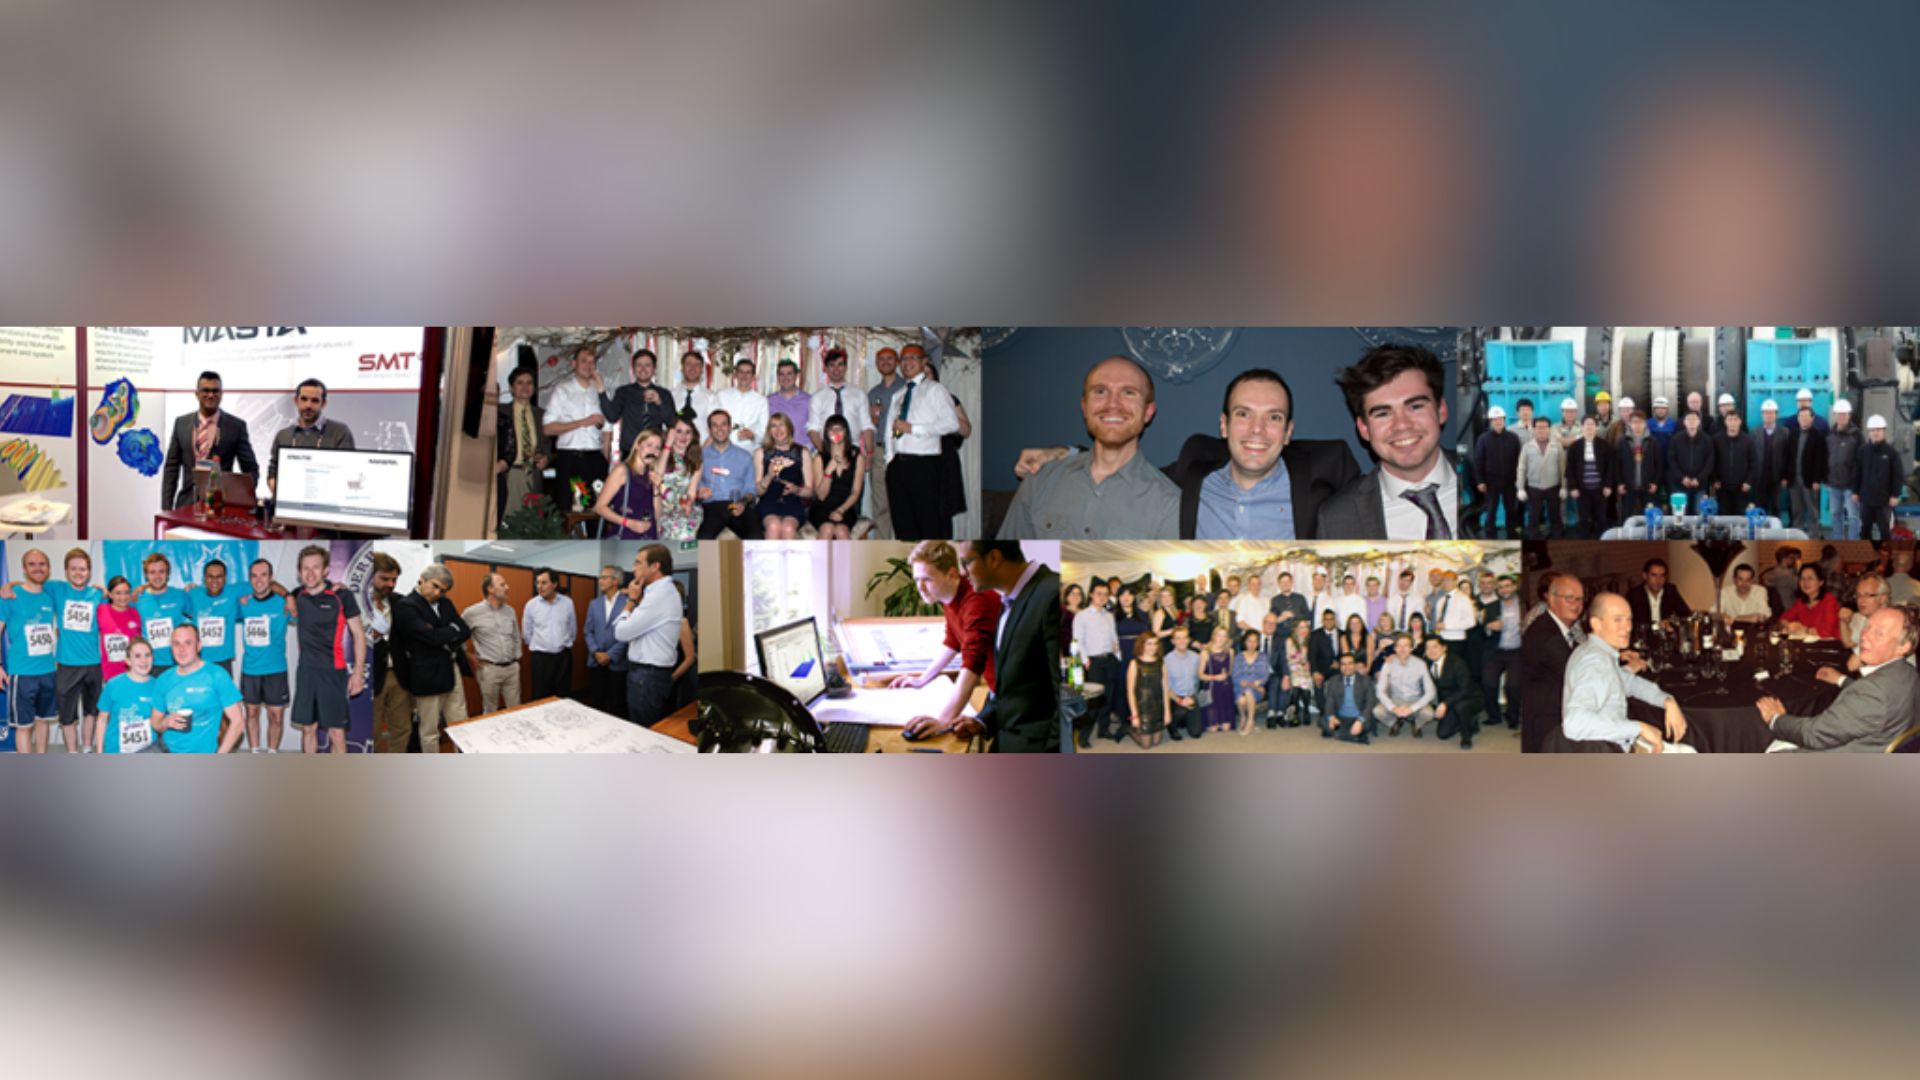 Collage image of staff at SMT.